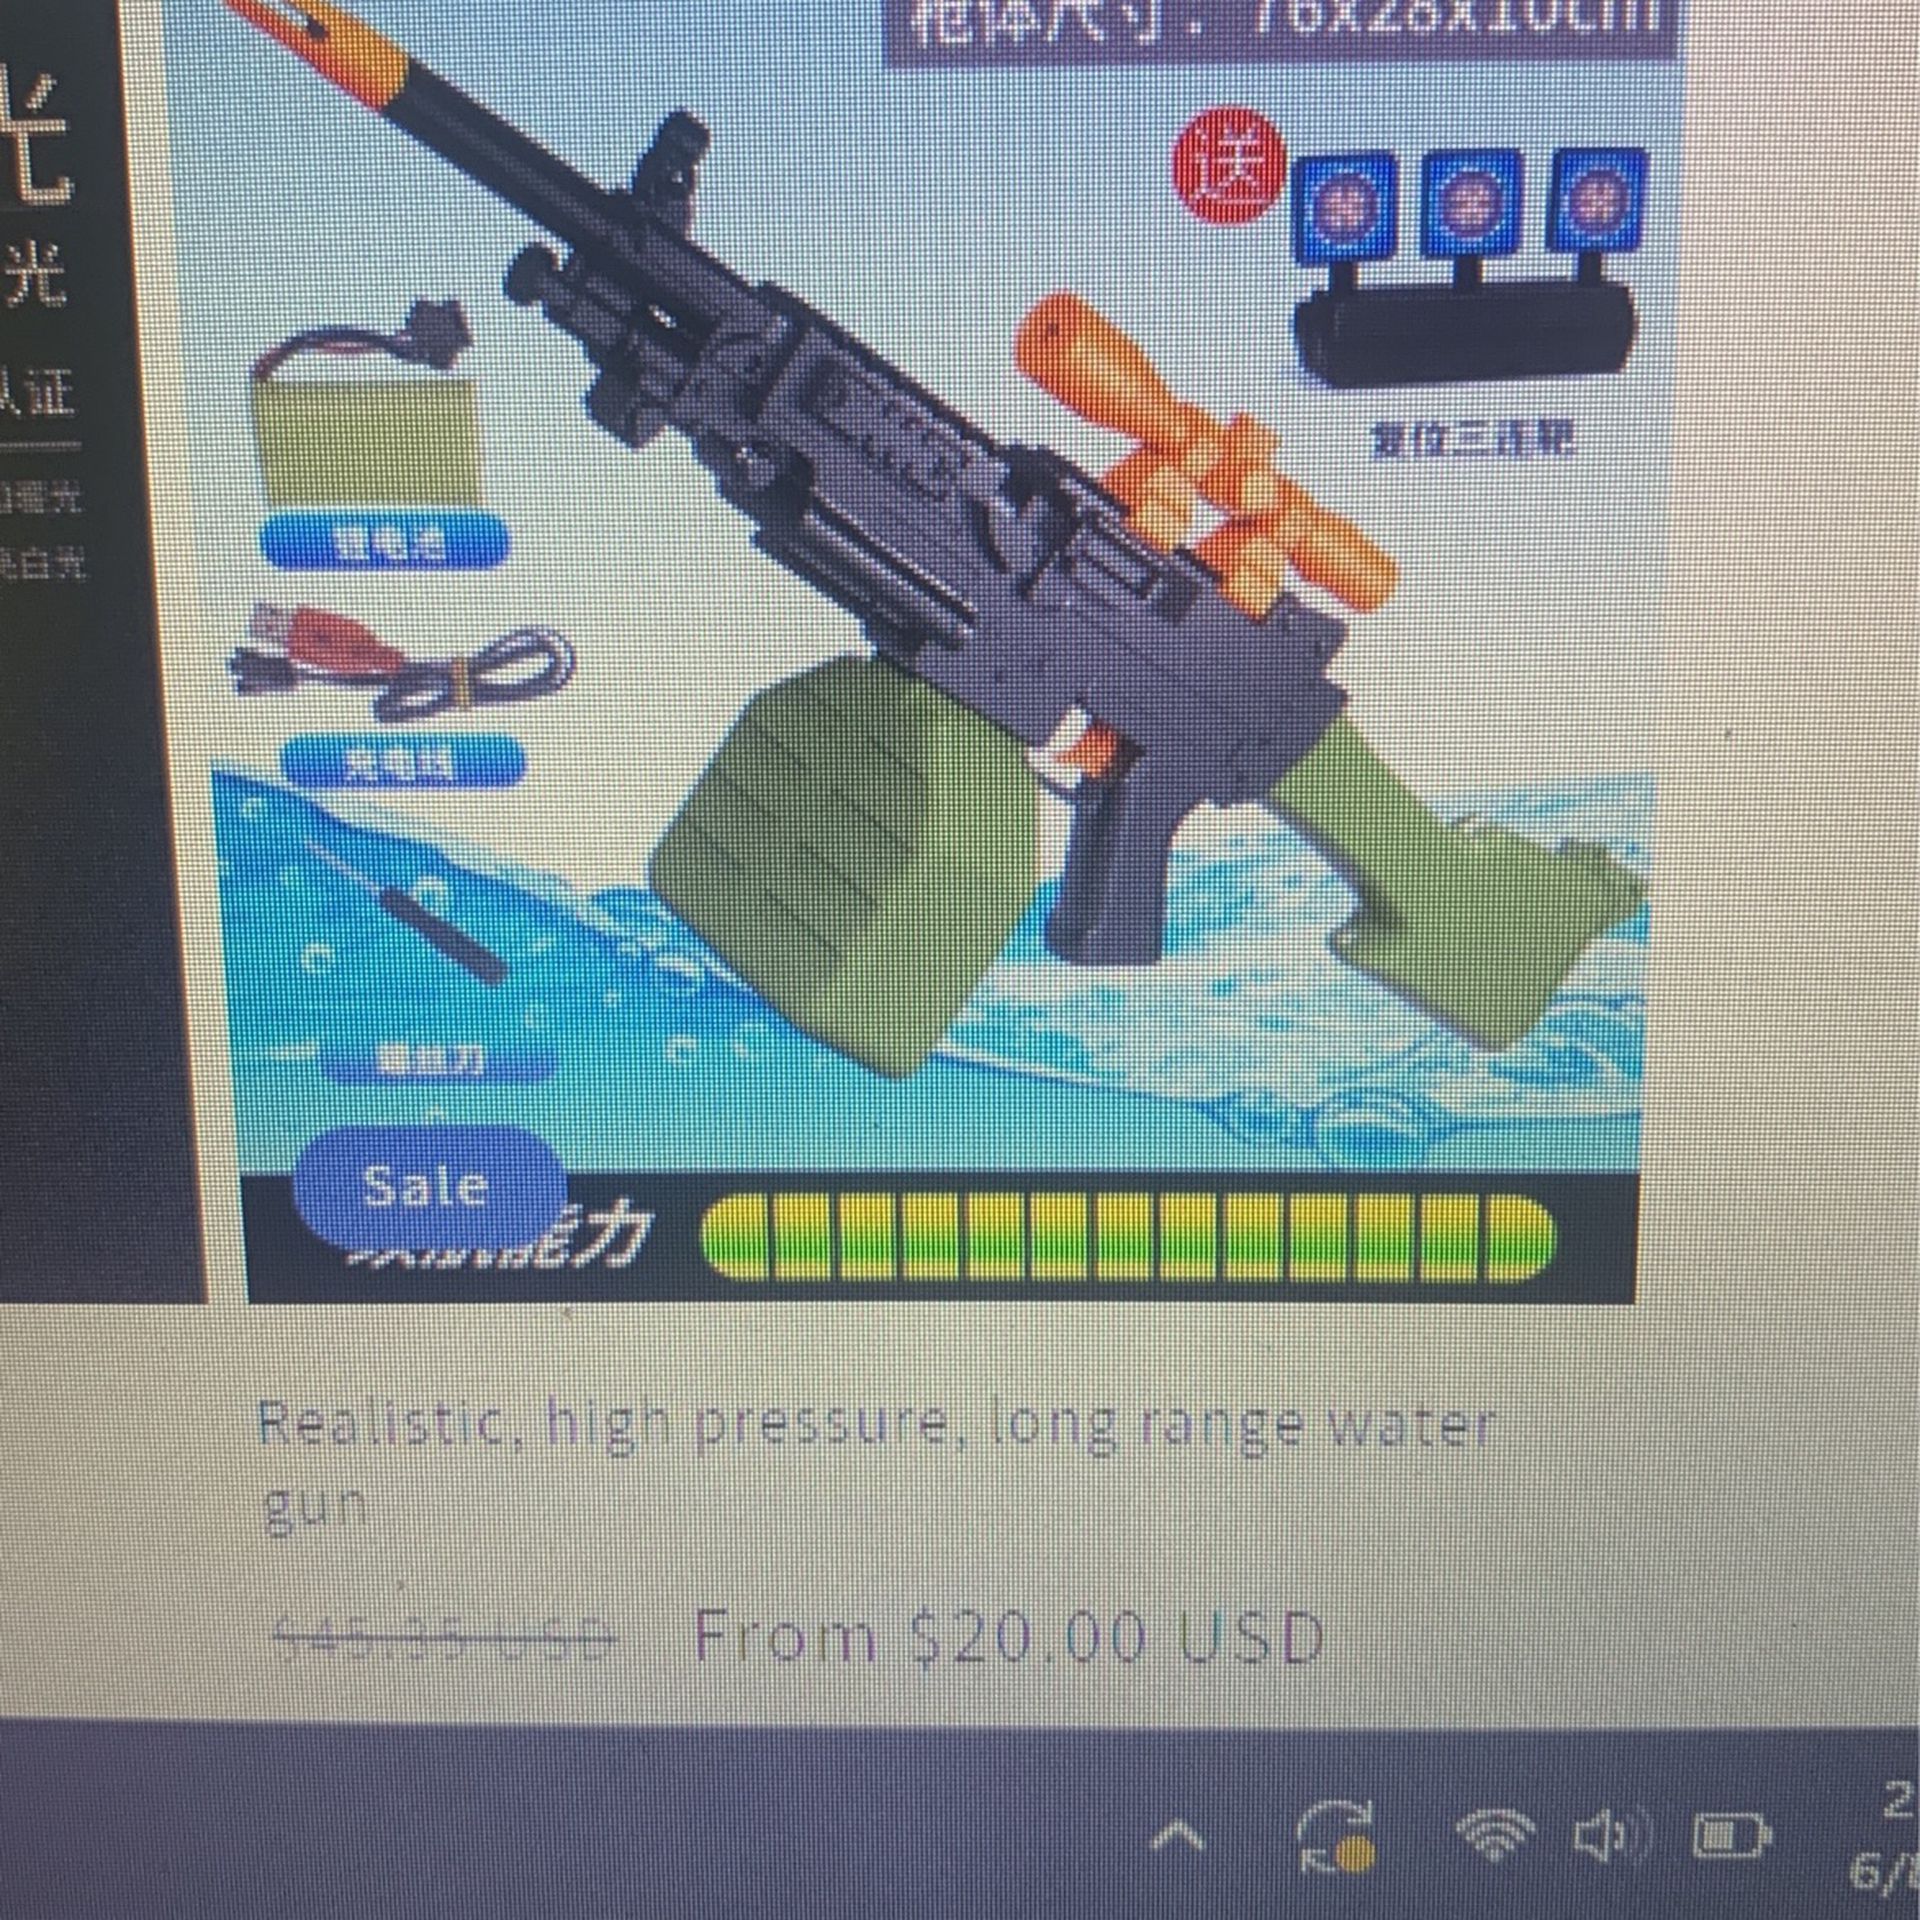 Supreme Spyra Two Water Blaster for Sale in Buena Park, CA - OfferUp